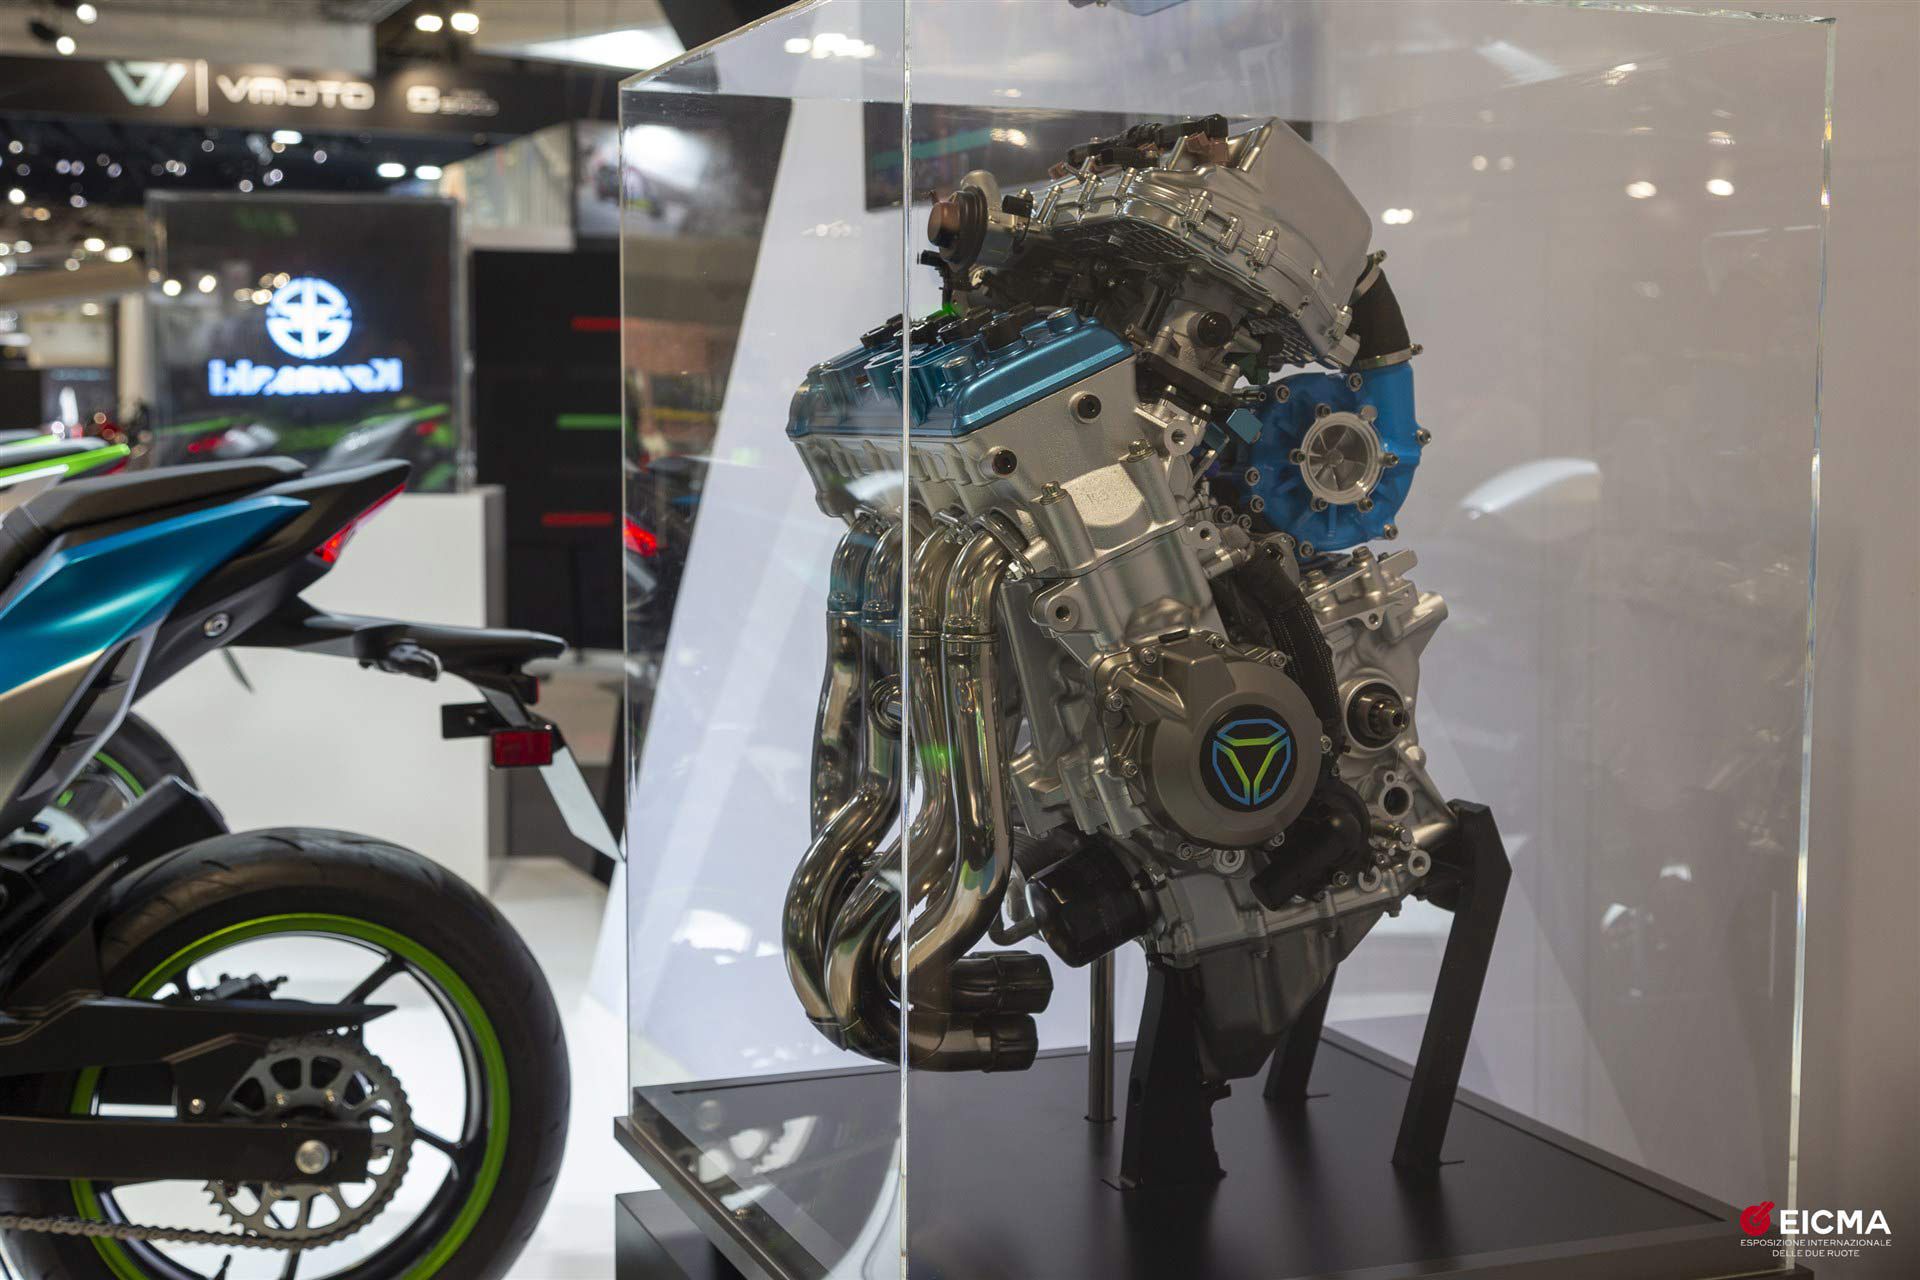 The last hope for IC? Kawasaki’s H2-inspired hydrogen-powered motor.